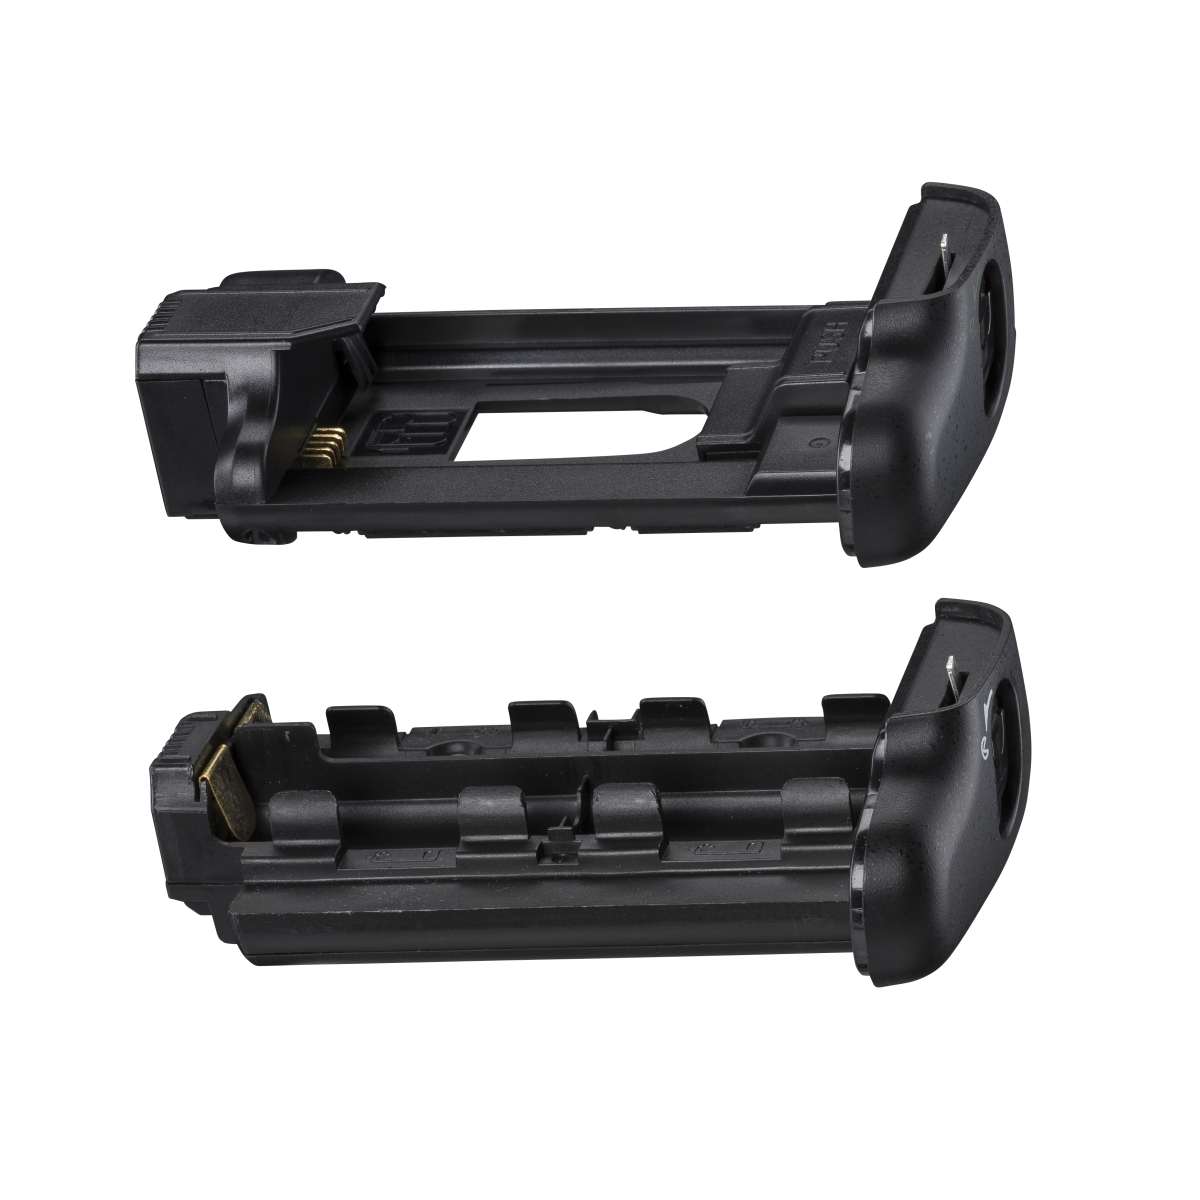 Walimex pro Battery Grip for Nikon D600